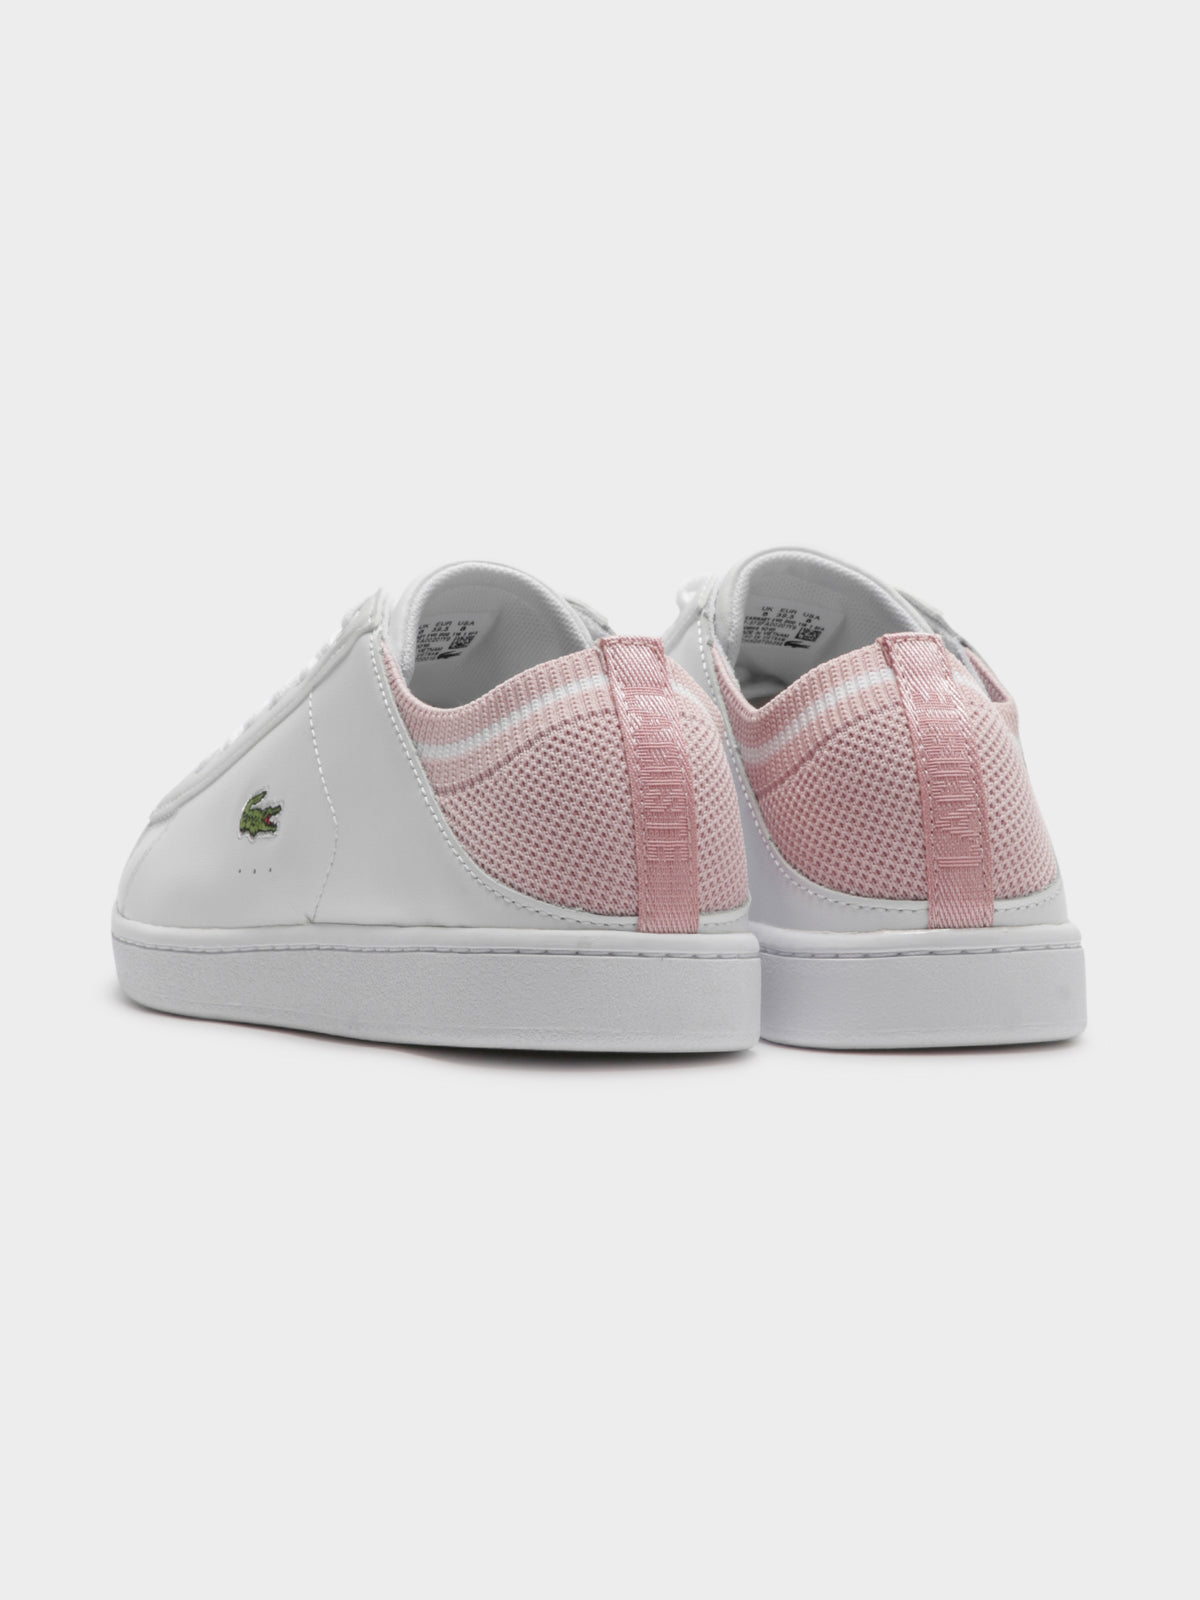 Carnaby Evo Duo 119 1 Sneakers in White &amp; Light Pink